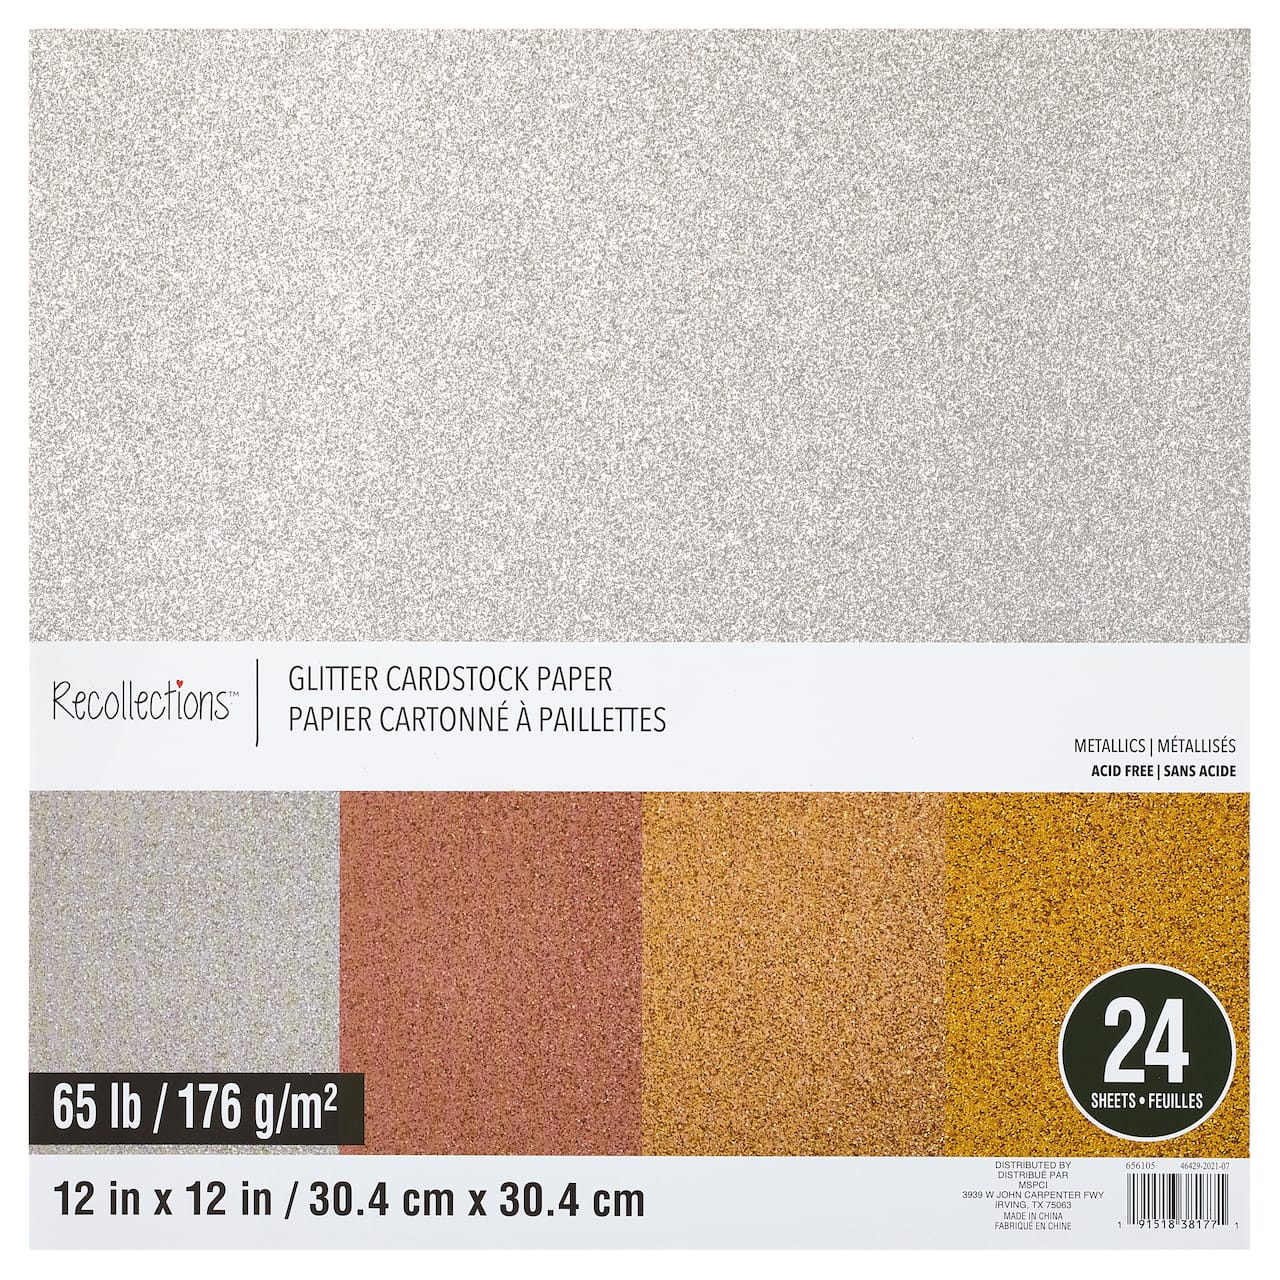 6 Pack: Glitter Metallic Cardstock Paper Pad by Recollections™, 12 x 12